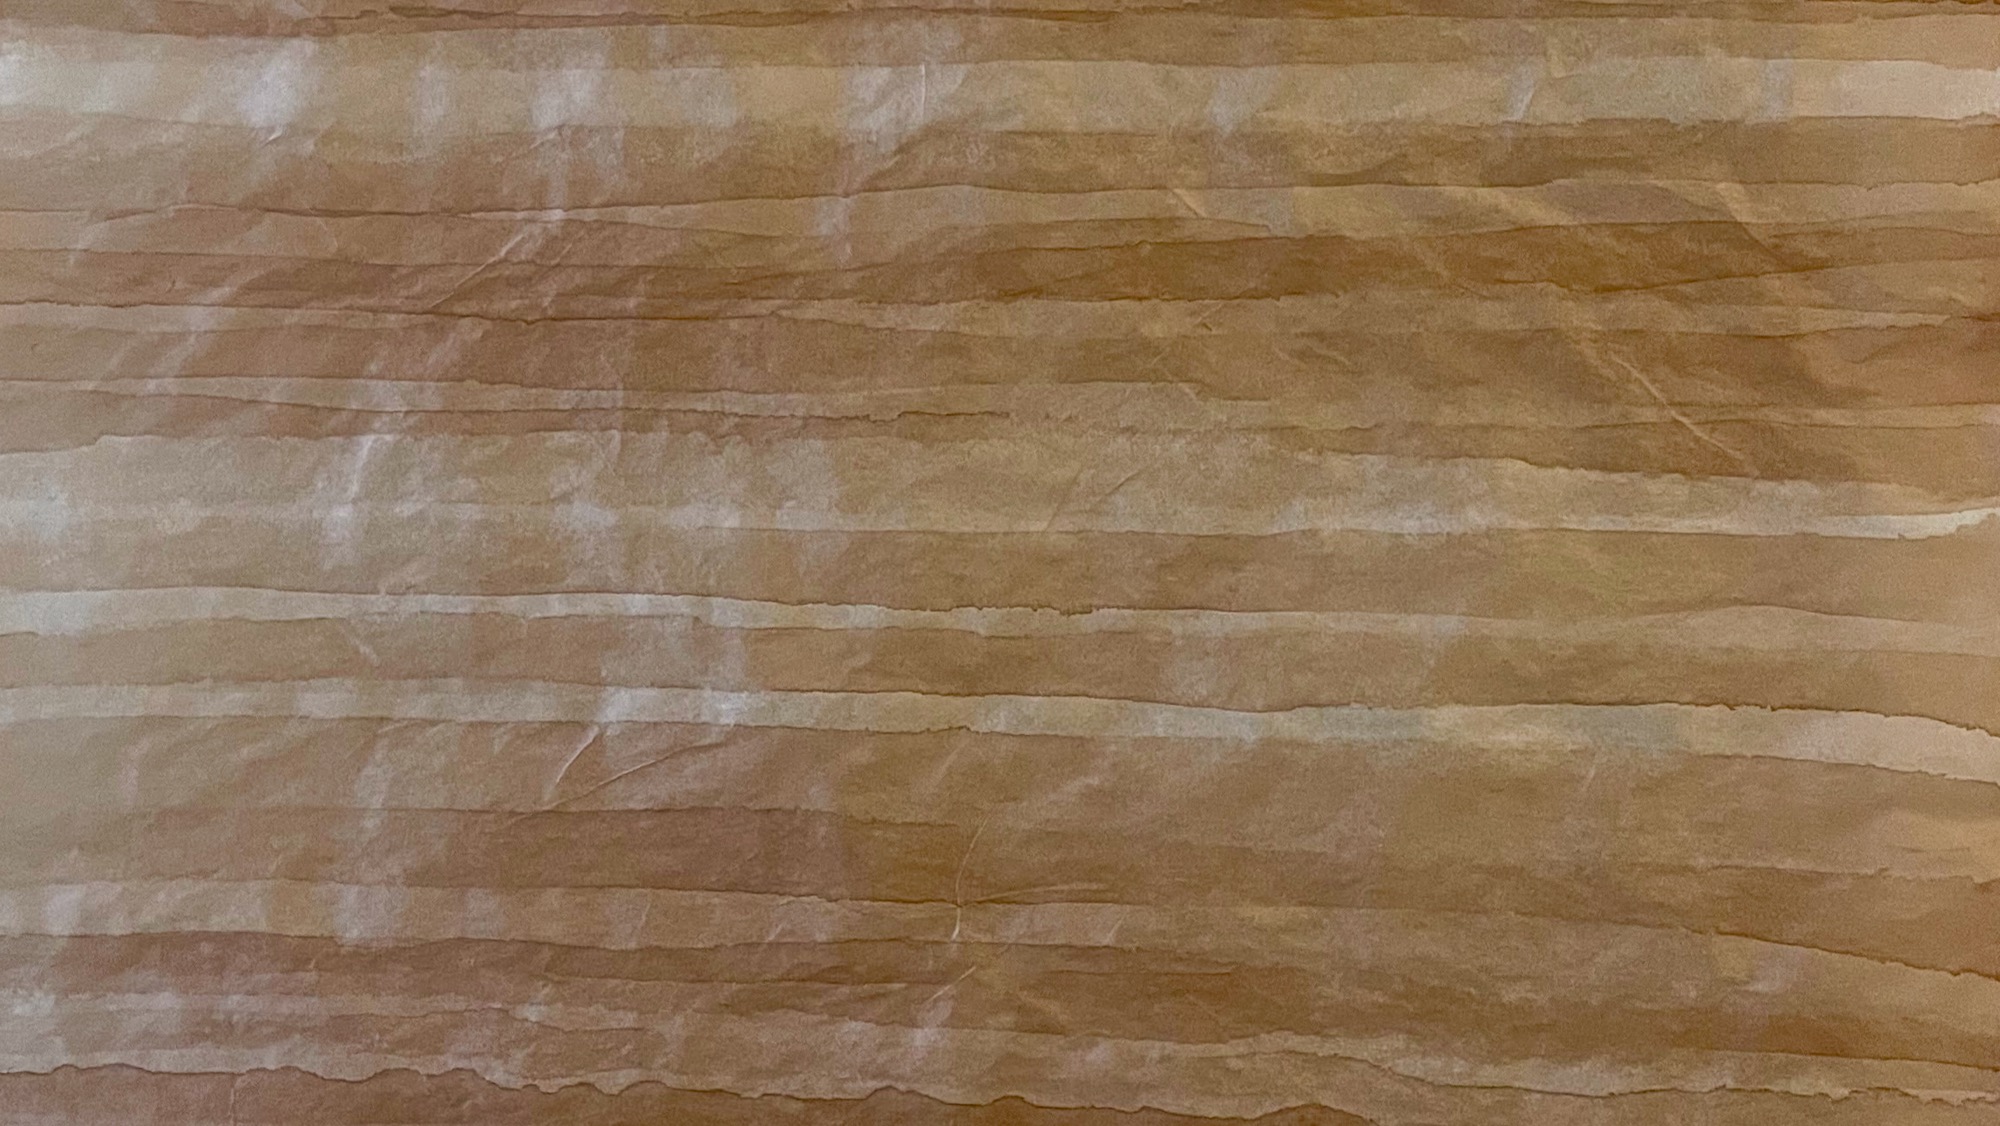 Bands of red-brown kakishibu painted on washi with visible wet edges